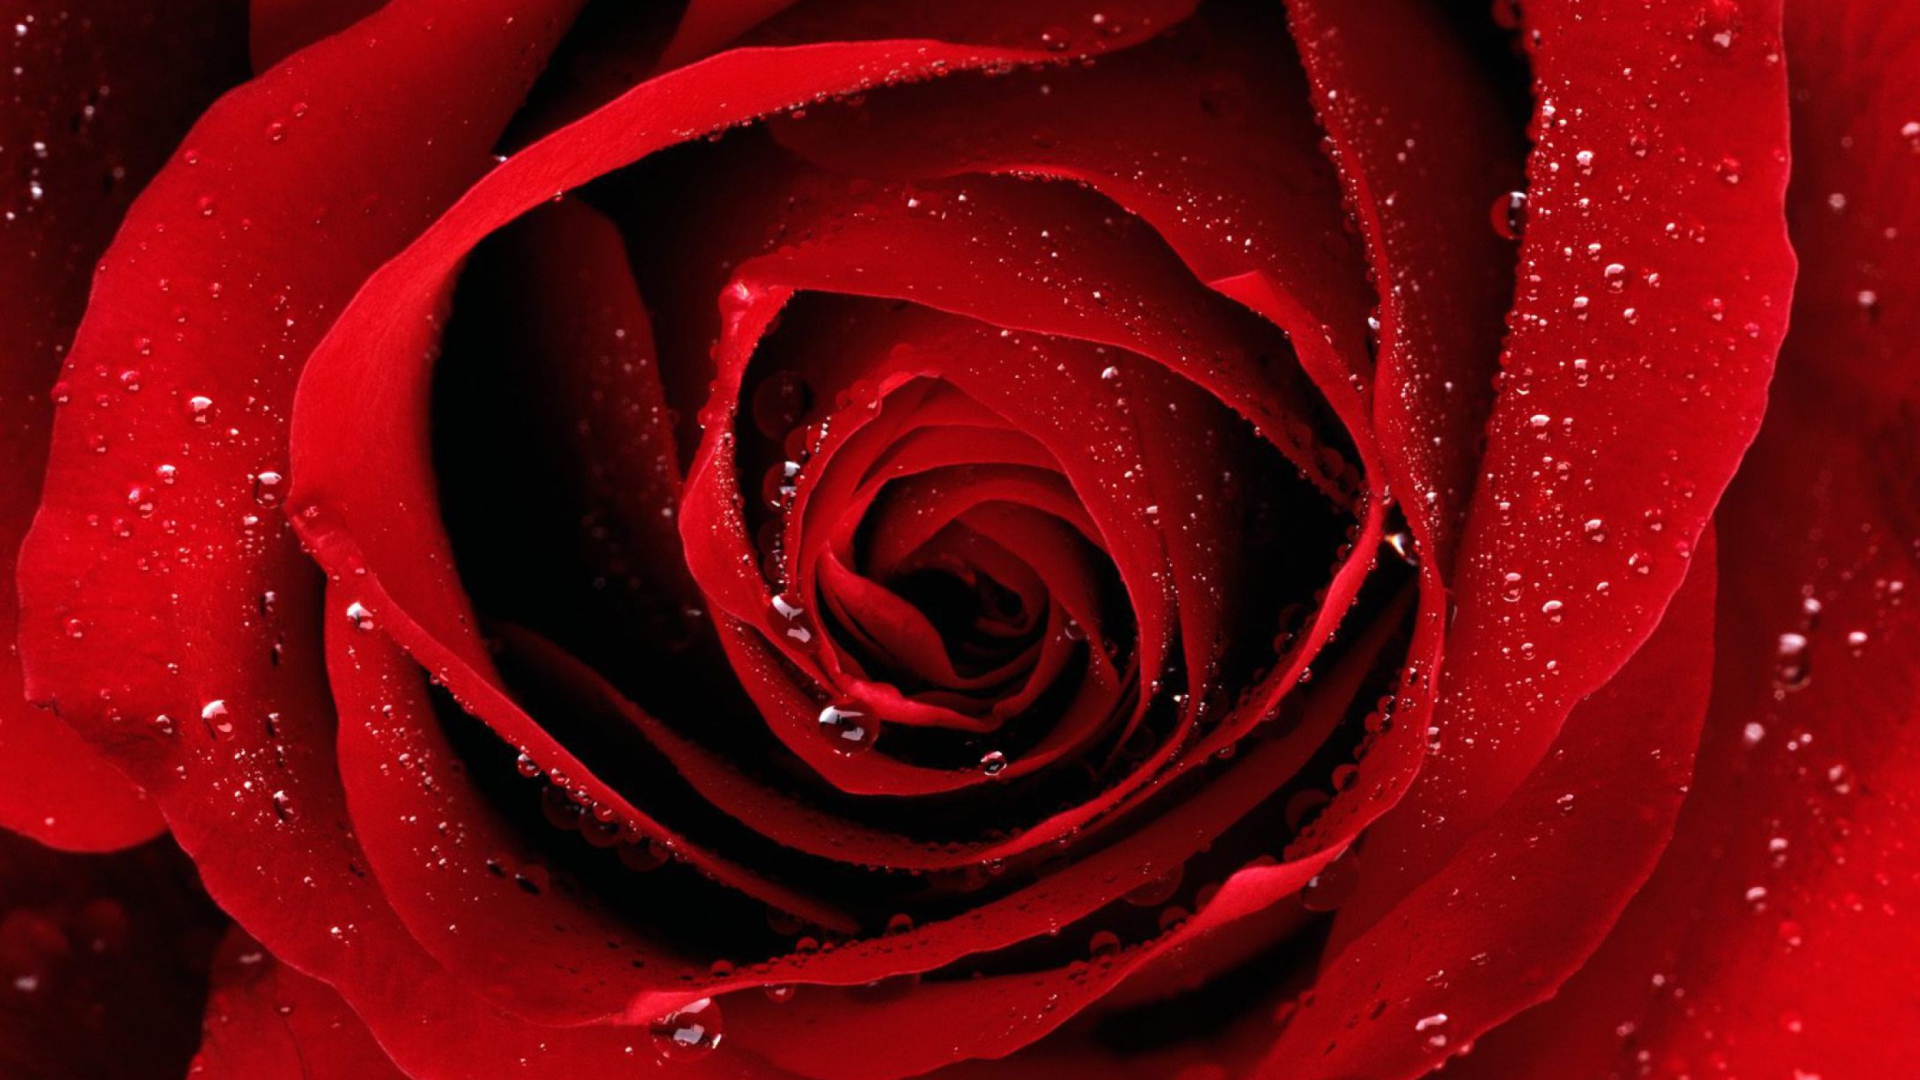 Sfondi Scarlet Rose With Water Drops 1920x1080